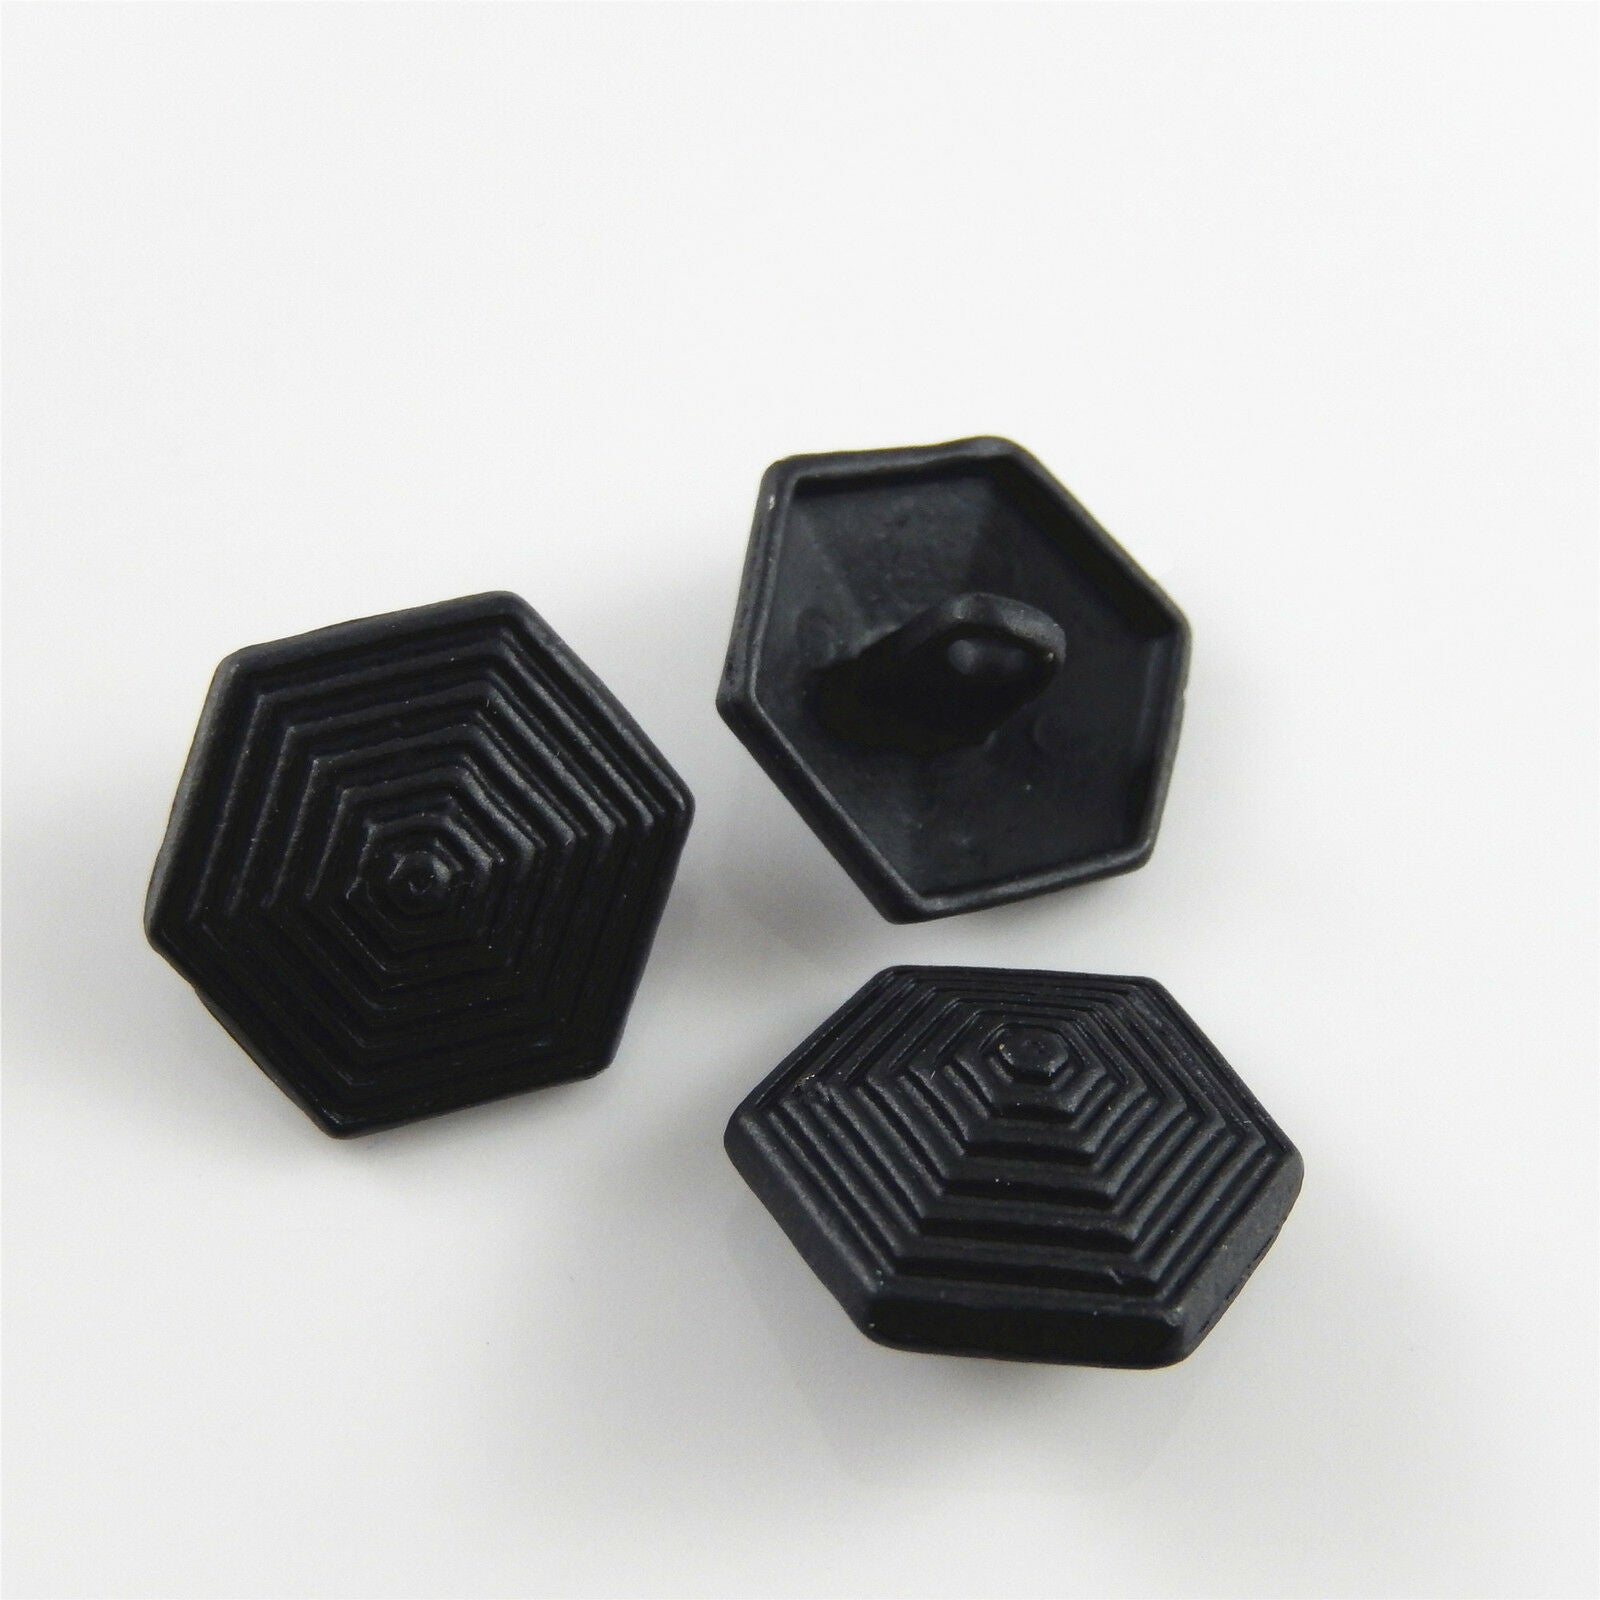 10 pcs Black Matte Alloy Button Hexagon Shape Crafting Sewing Findings 18*18*8mm